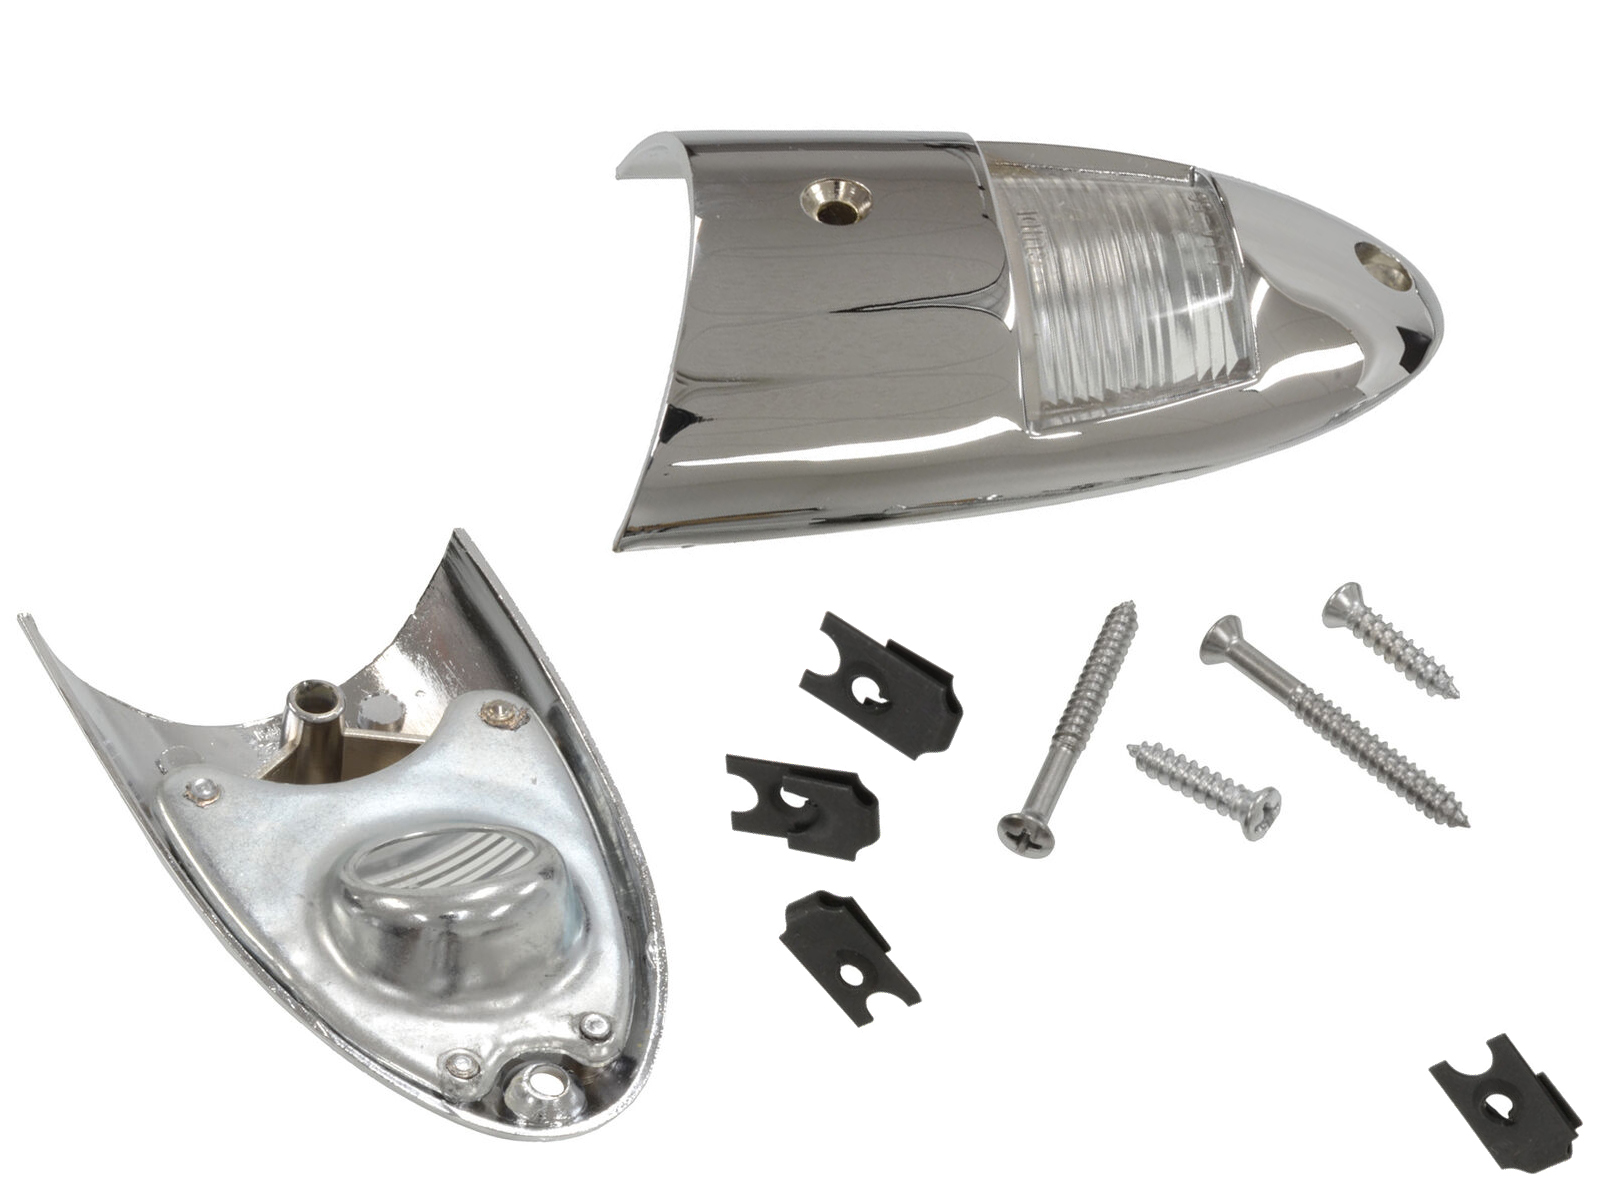 1956-1957 Corvette License Light Assembly with Fasteners